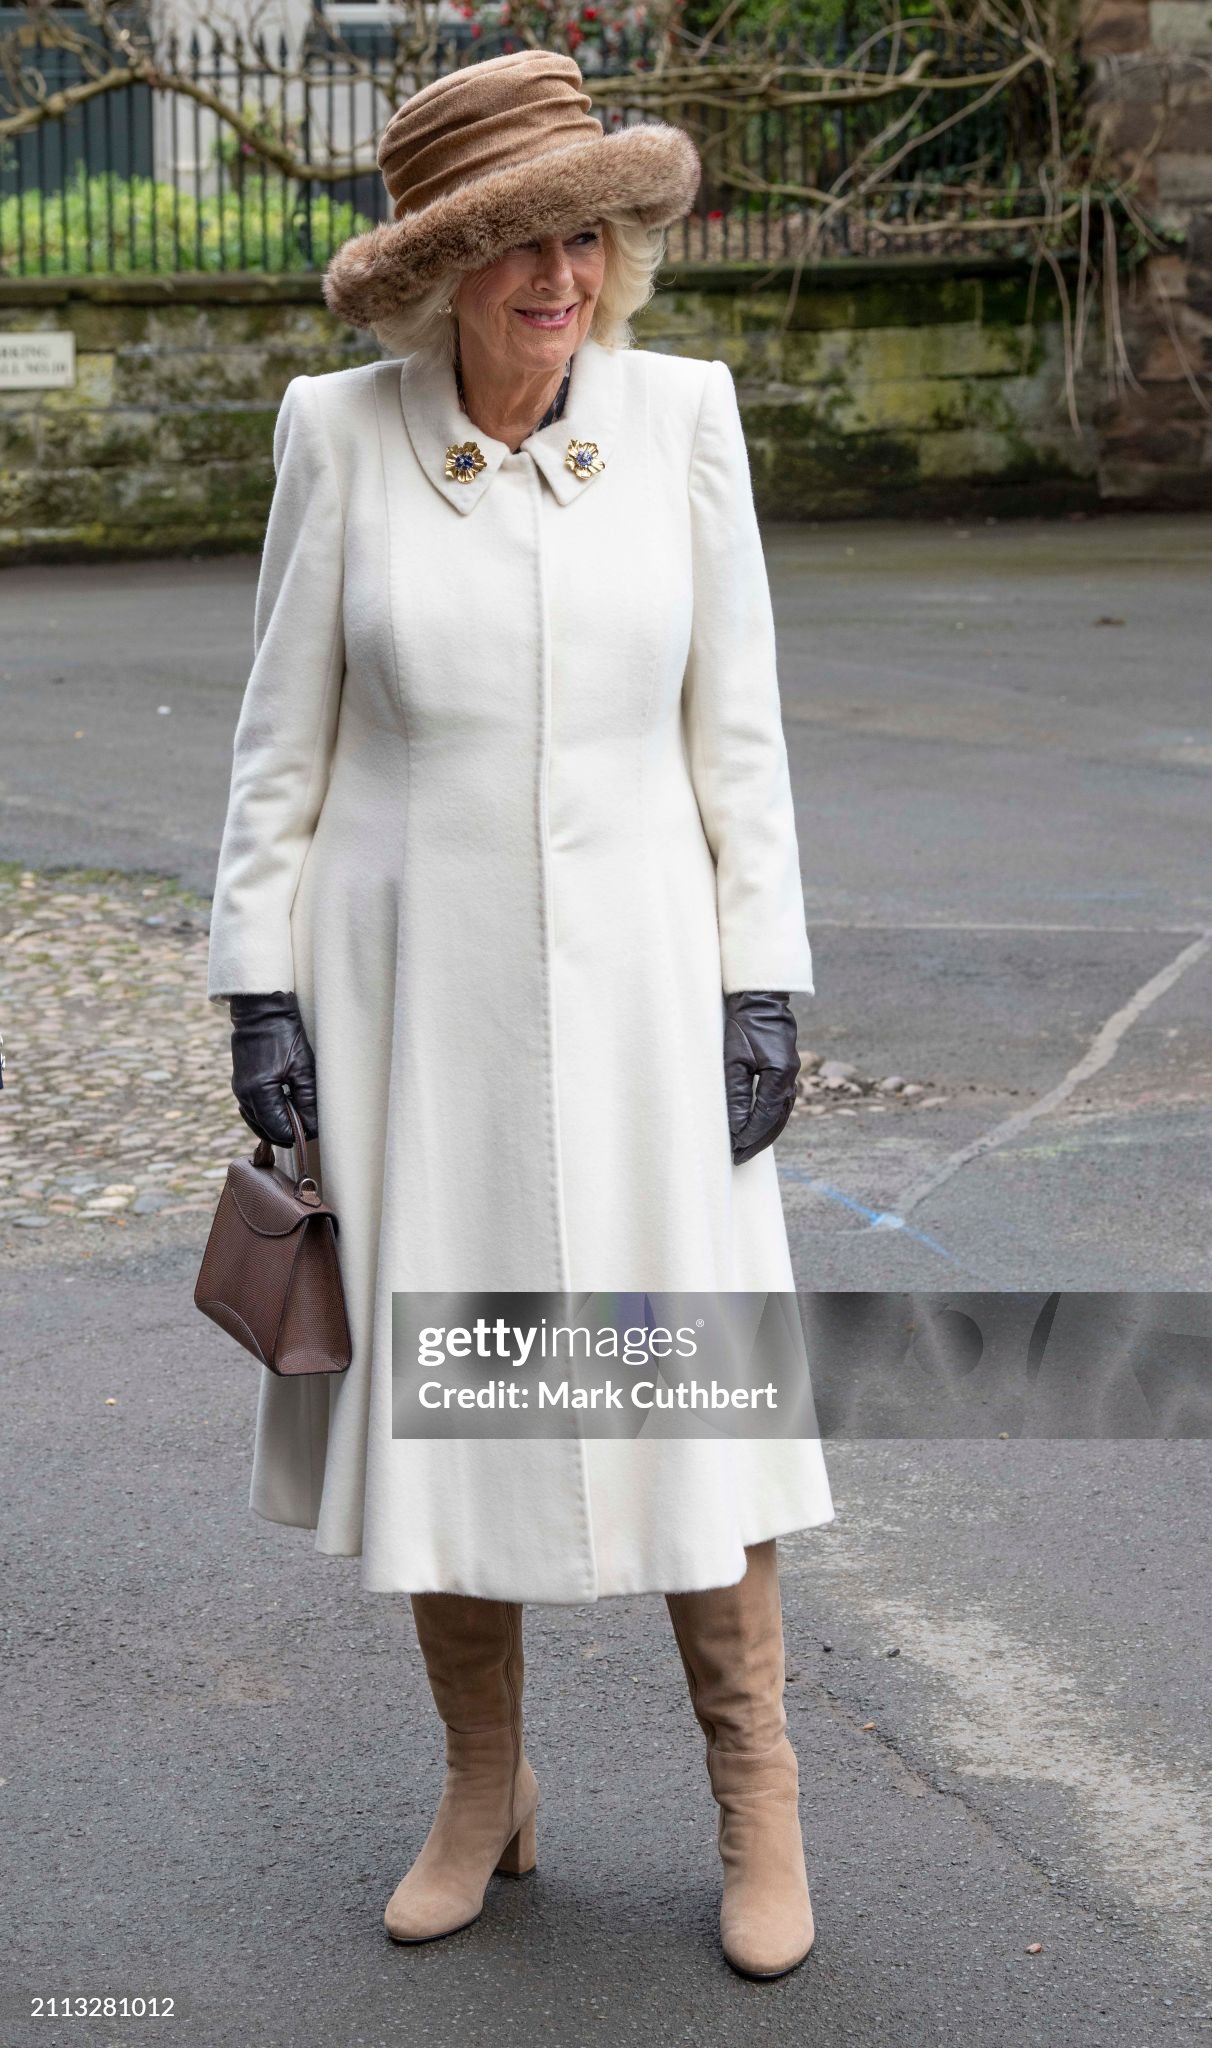 queen-camilla-attends-the-royal-maundy-service-at-worcester-cathedral.jpg?s=2048x2048&w=gi&k=20&c=thfJzHWG6T82DDrTNxMer-5mbp3C8iJzzahNBXOsl_s=